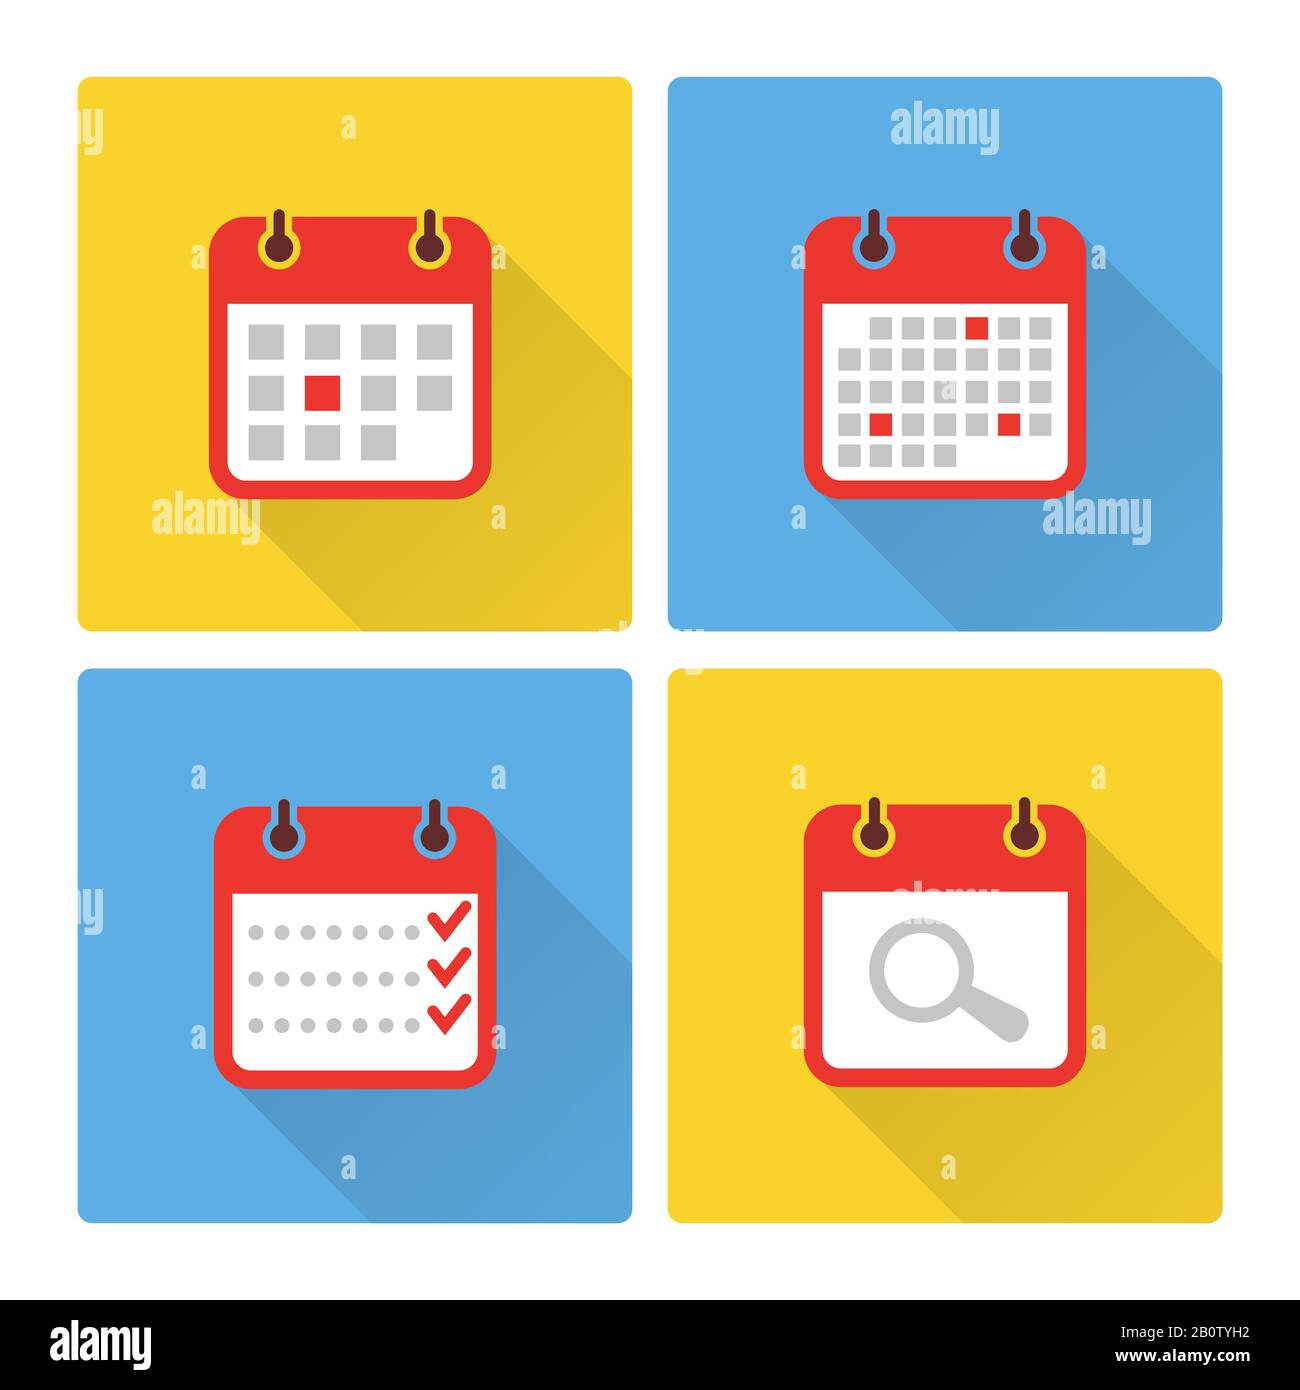 Calendar and to do list colorful flat icons. Calendar plan page icons. Vector illustration Stock Vector